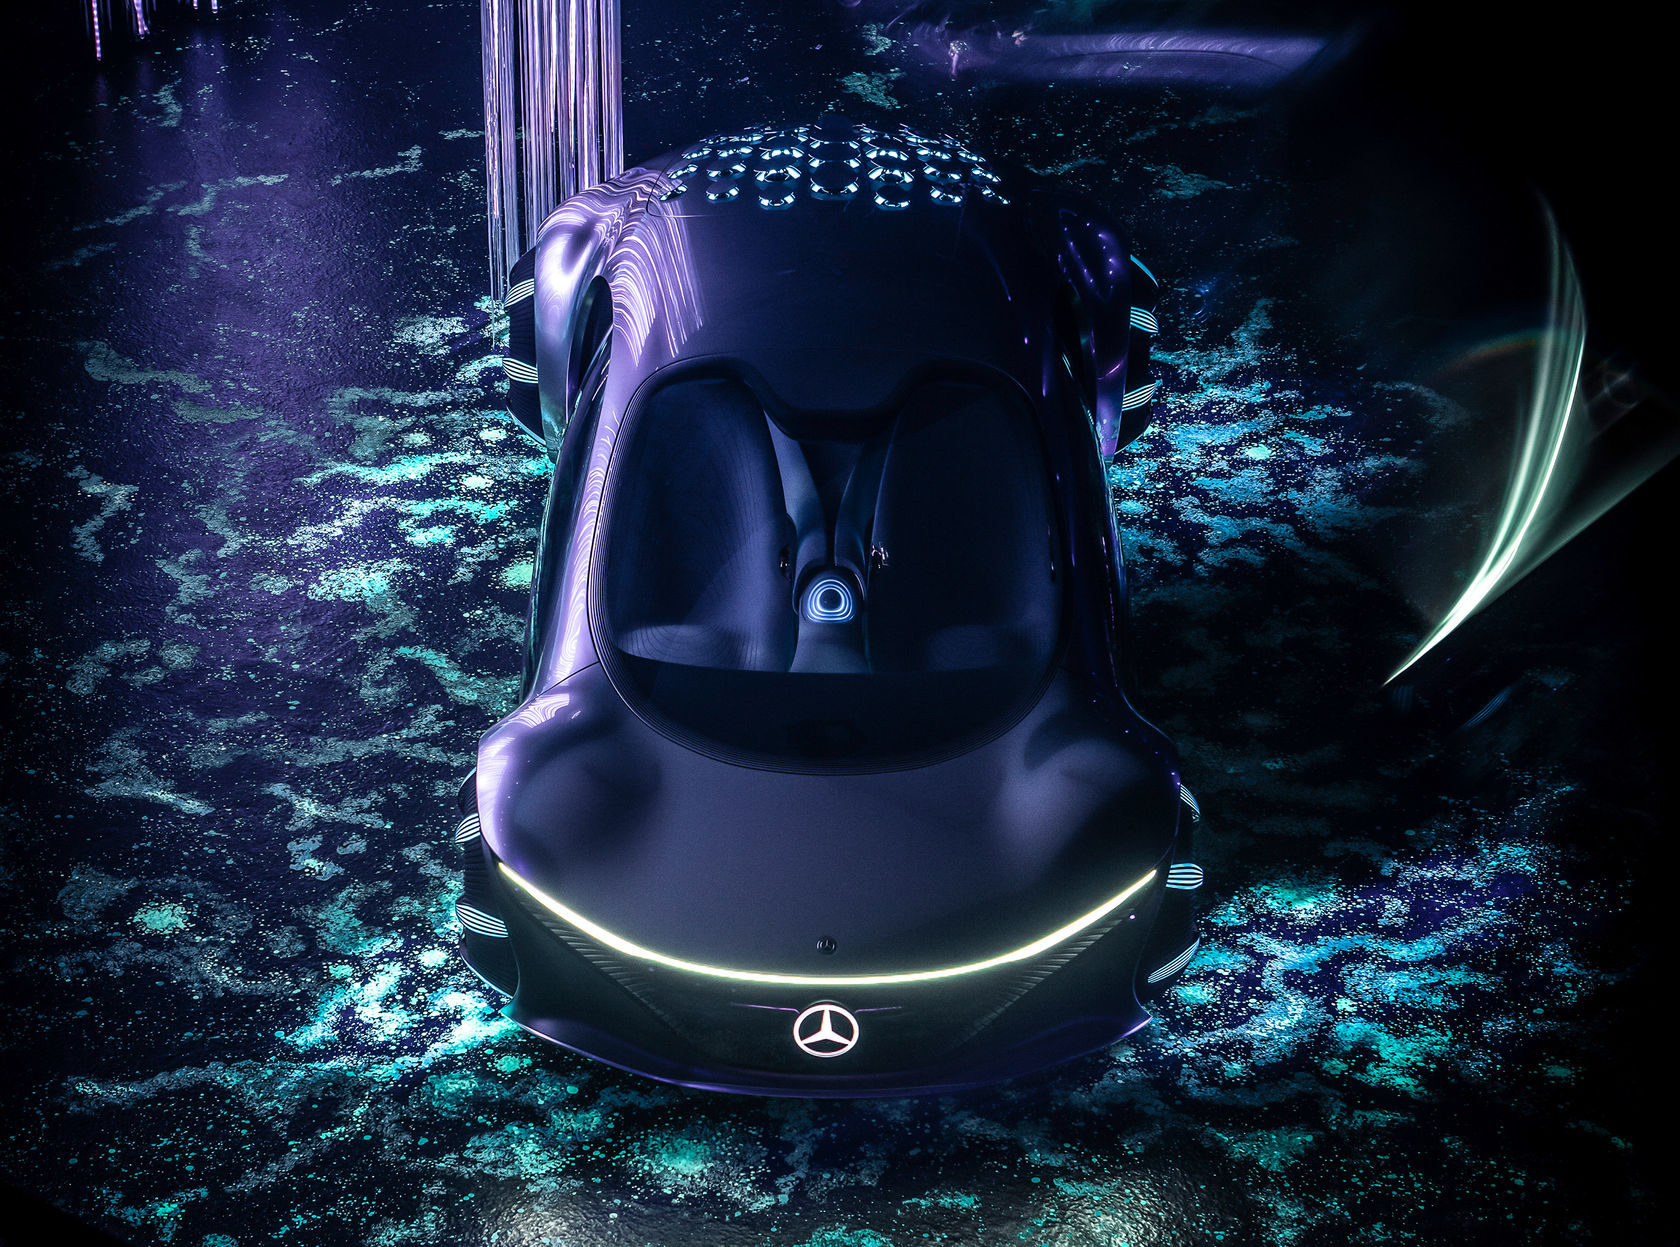 Inspired by the future: The Mercedes-Benz VISION AVTR.